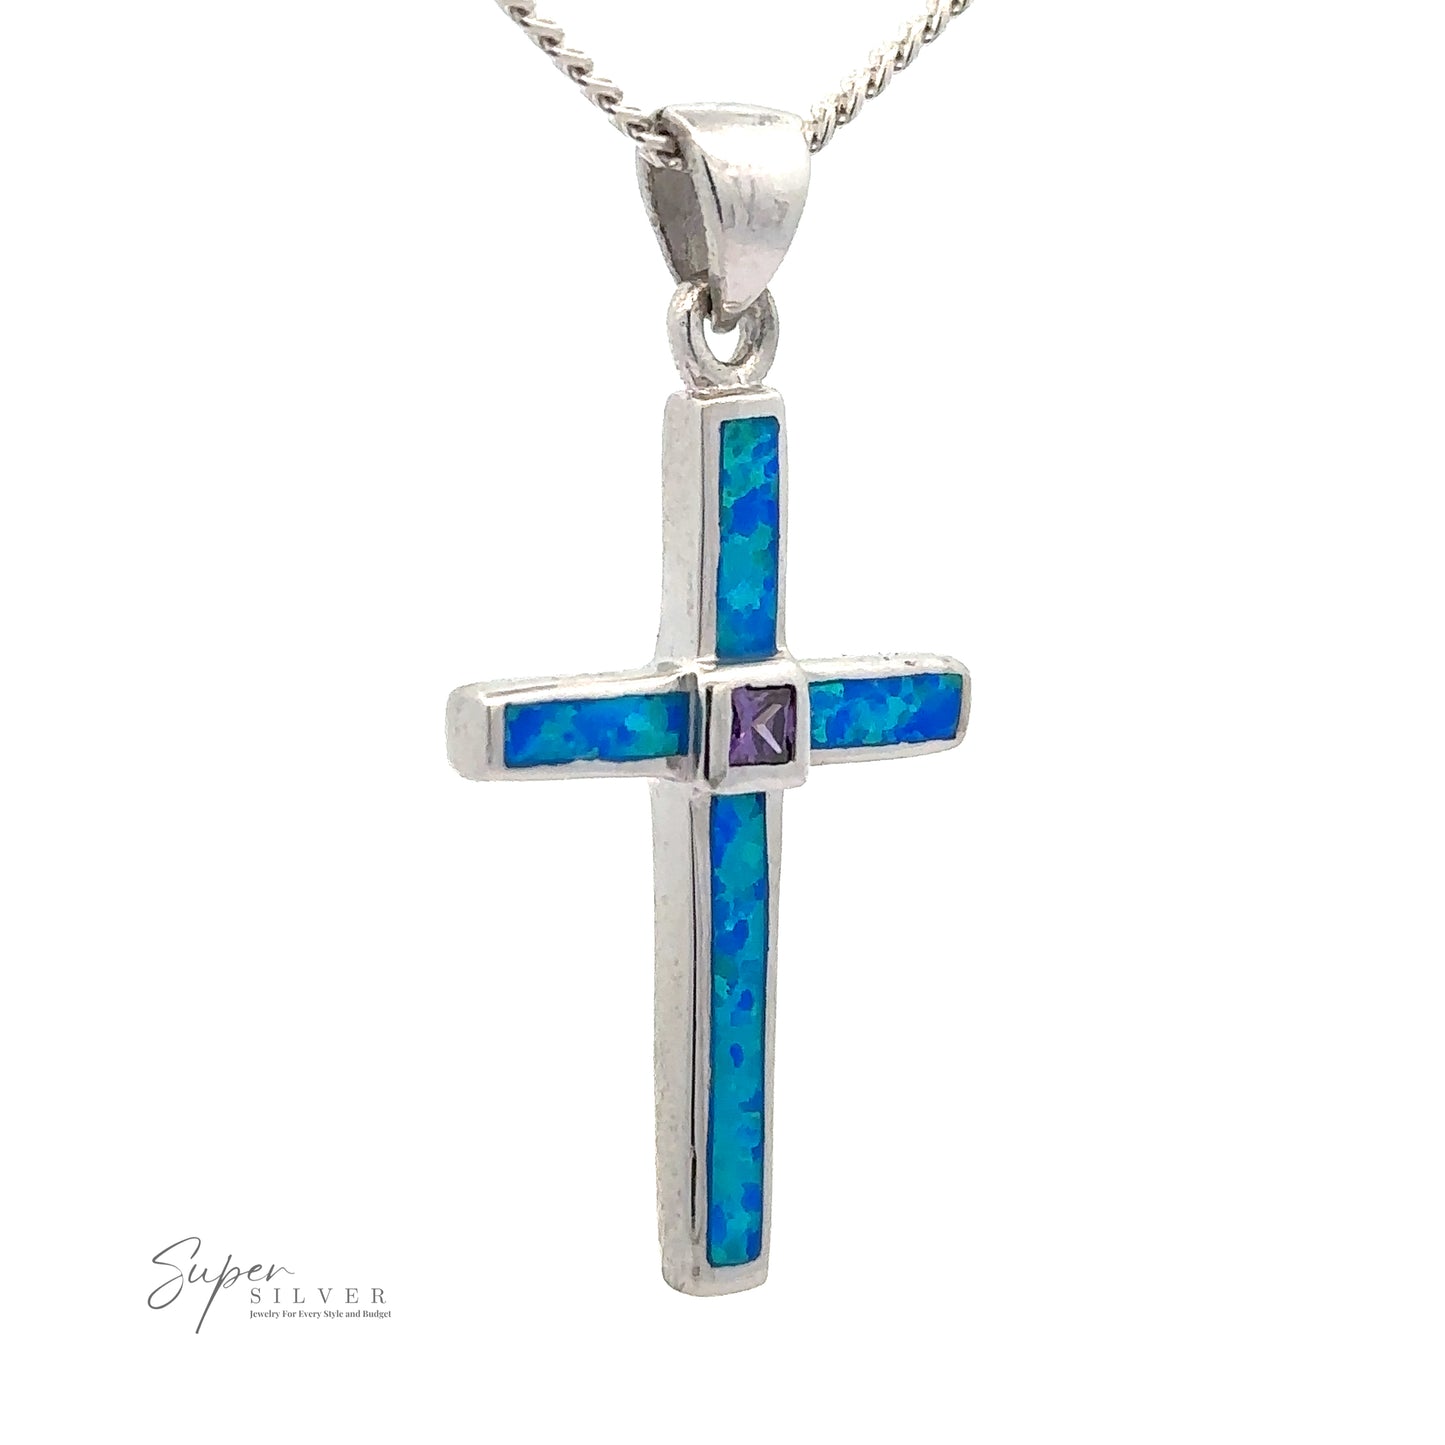 A stunning Blue Opal Cross Pendant With Amethyst Stone, hanging gracefully from a twisted .925 Sterling Silver chain. The inscription "Super Silver" is elegantly etched in the lower left corner.